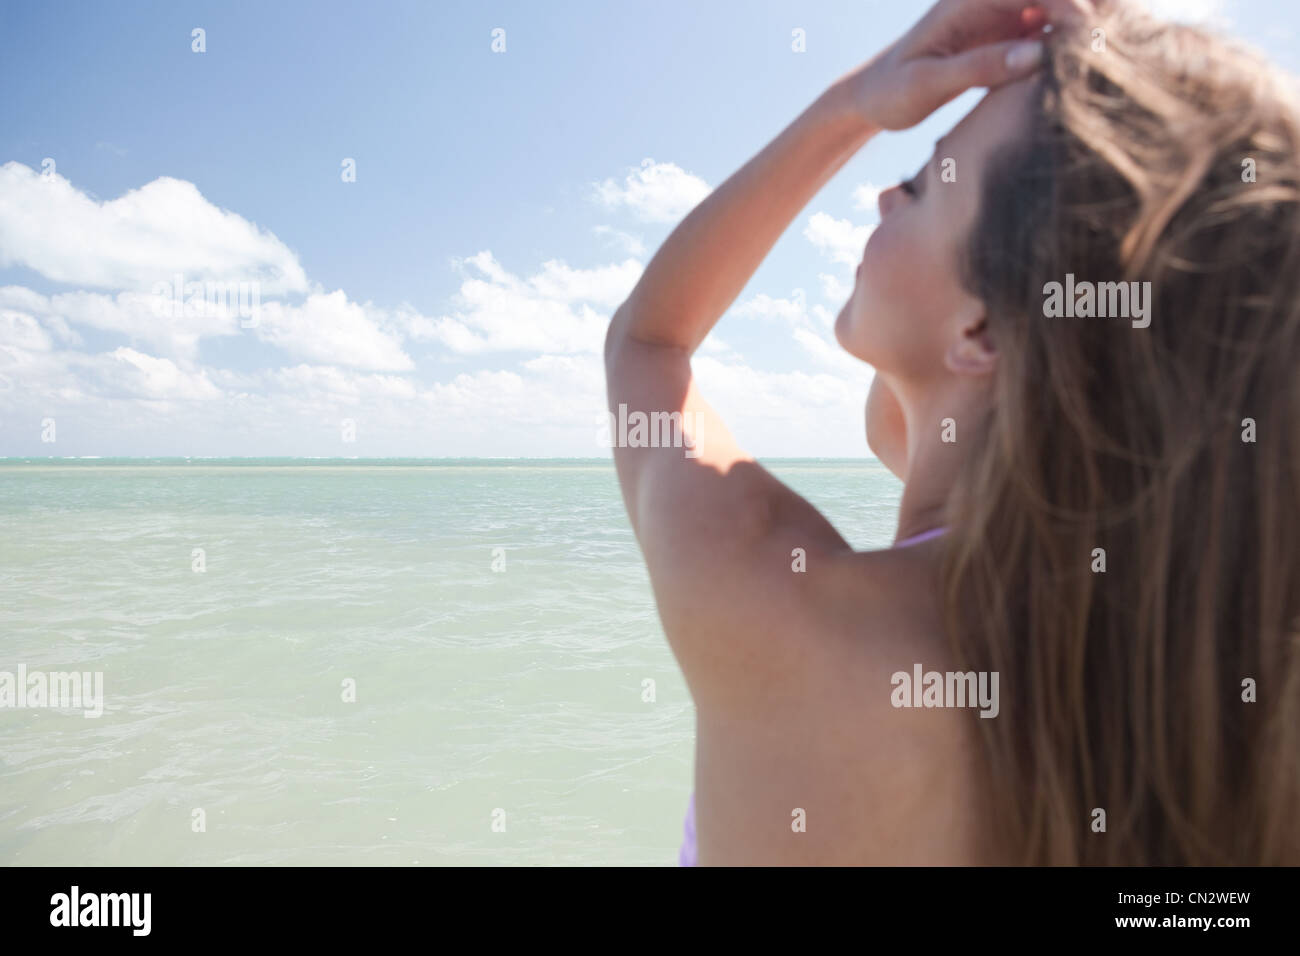 Topless young woman by sea, rear view Stock Photo